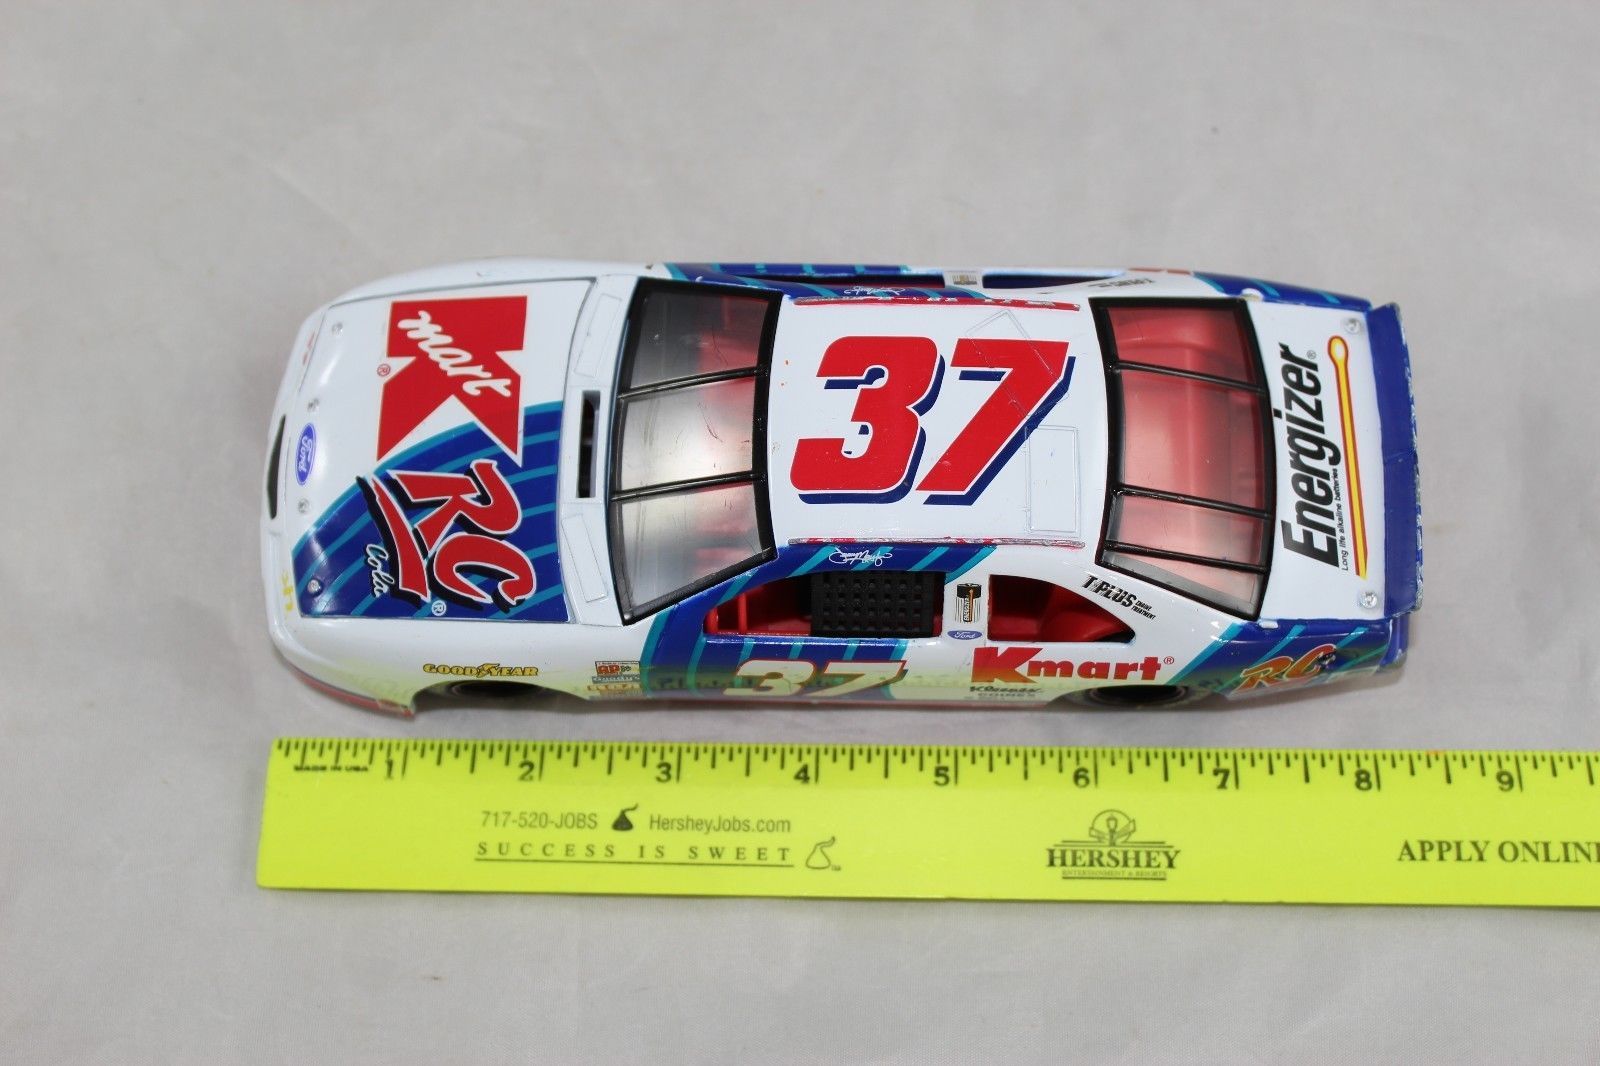 Details about   1997 Revell 1:24 Diecast NASCAR Jeremy Mayfield K-Mart RC Cola Thunderbird 1;24 